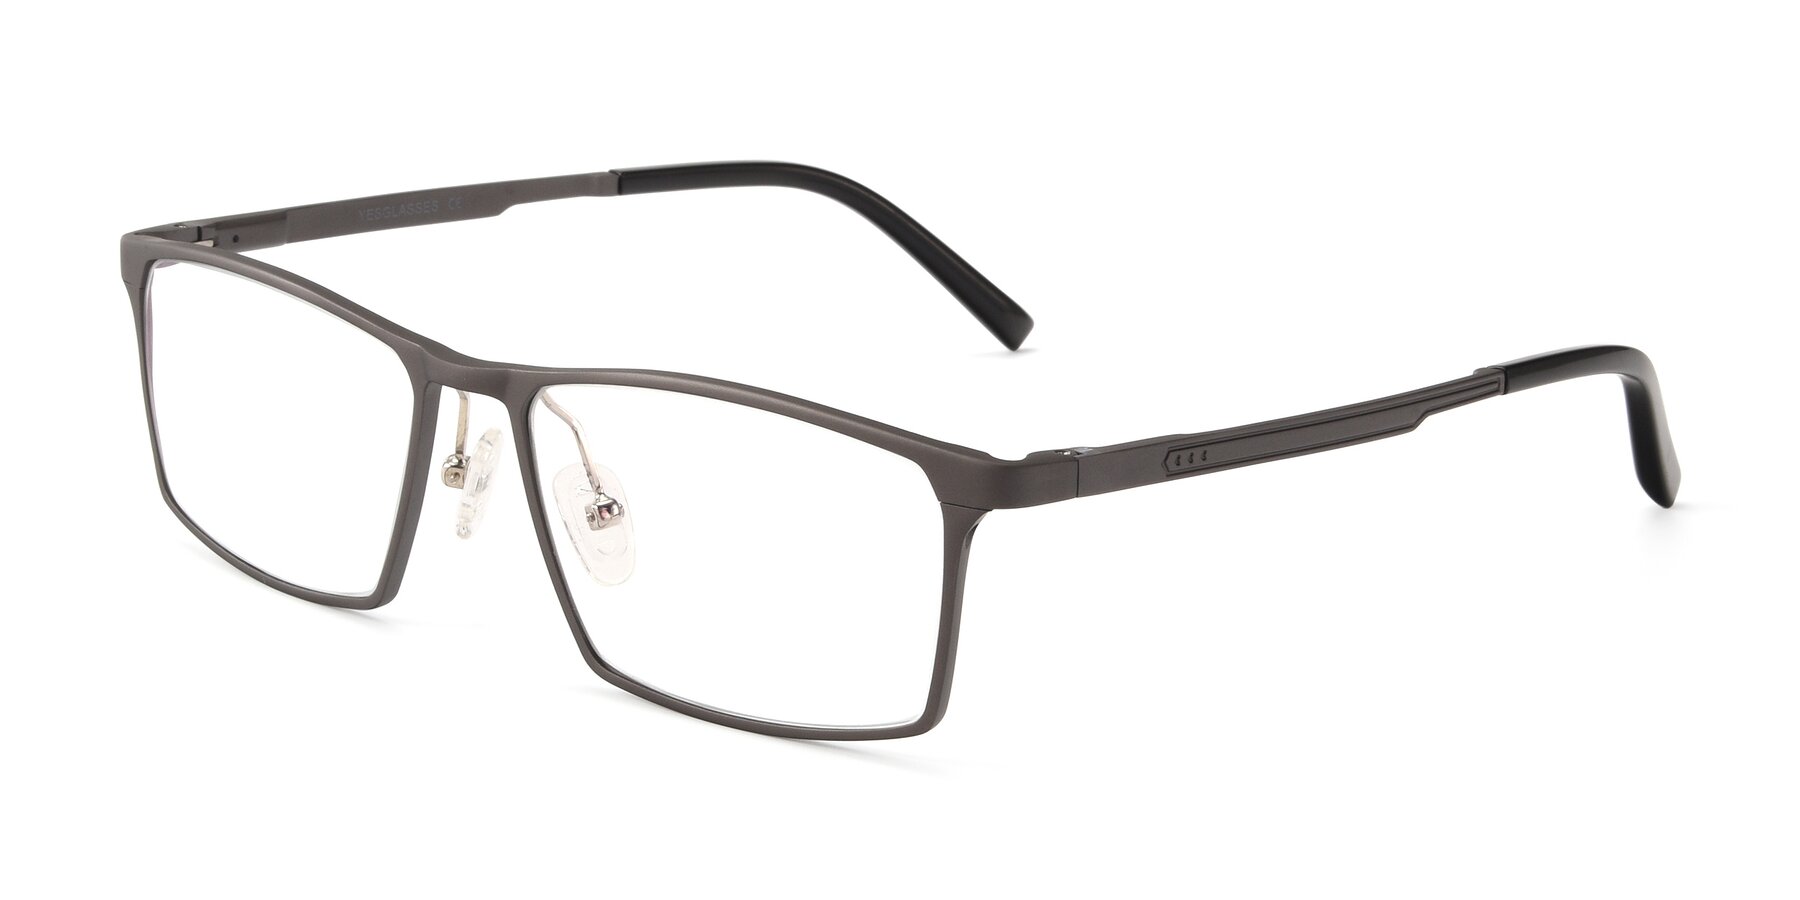 Angle of CX6341 in Gunmental with Clear Eyeglass Lenses